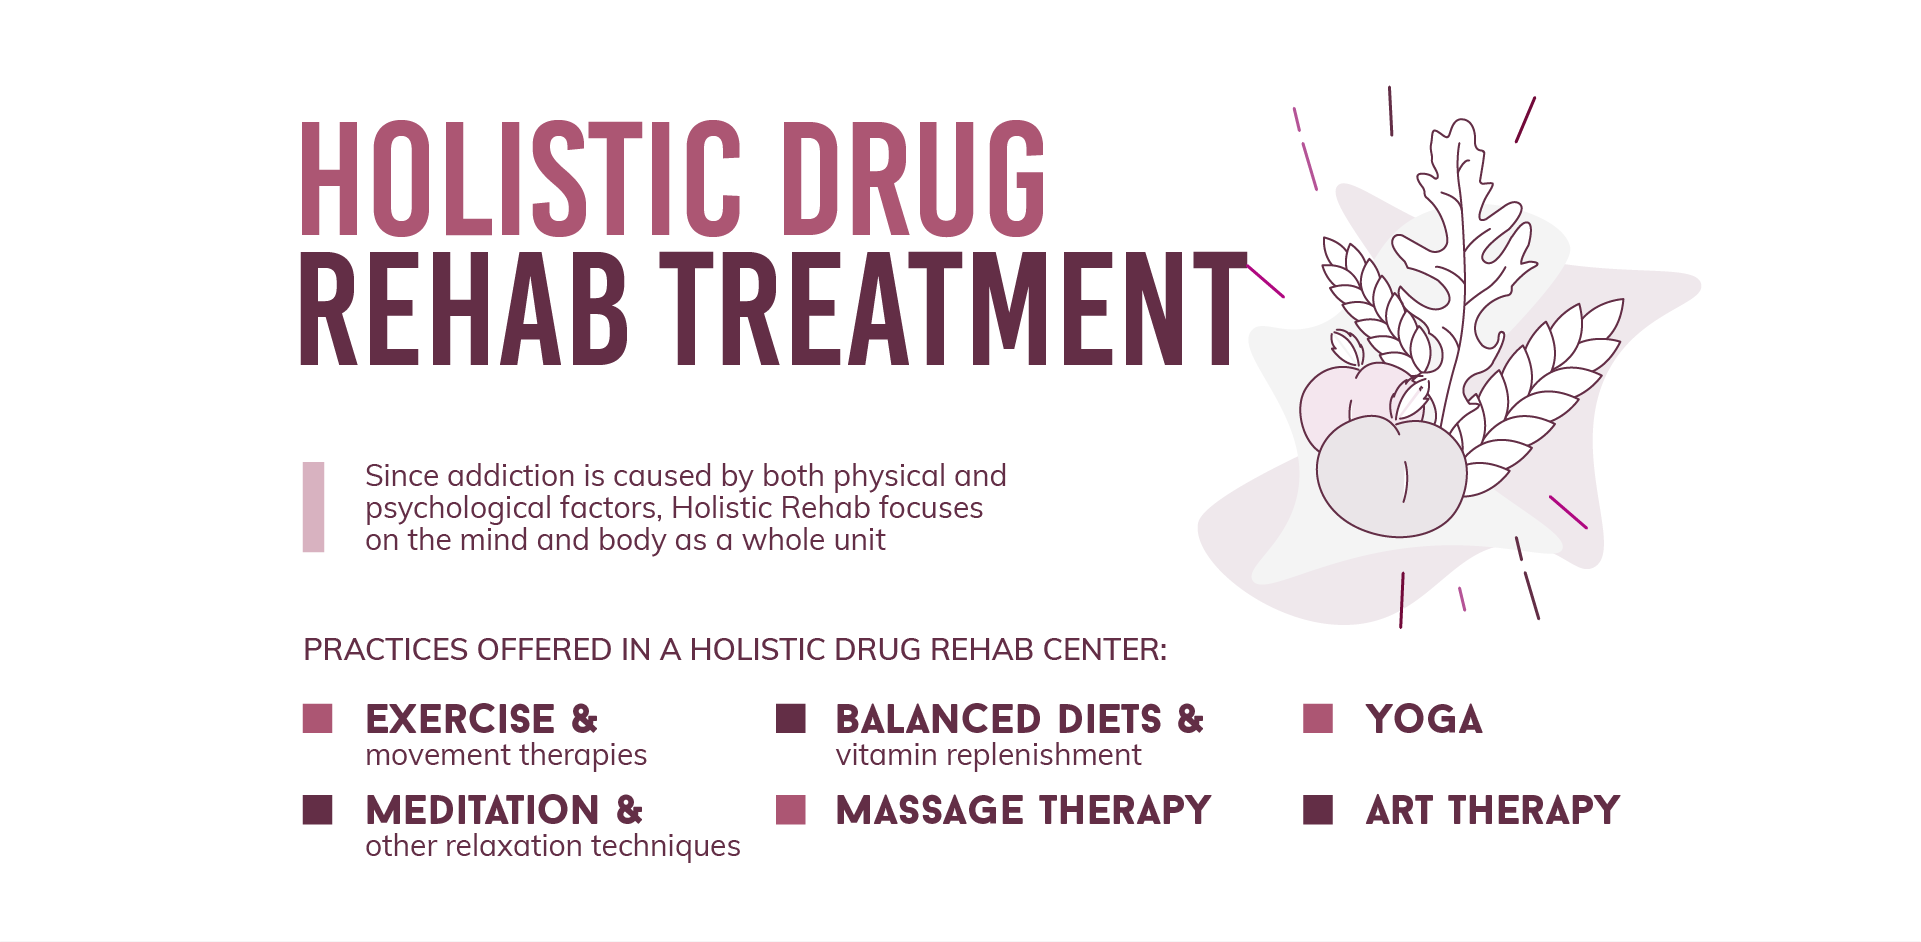 Since addiction is caused by both physical and psychological factors, "Holistic Rehab" focuses on the mind and body as a whole unit,practices offered in a holistic drug rehab center are, exercise and movement therapies, meditation and other relaxation techniques, balanced diets and vitamin replenishment, massage therapy, yoga and art therapy